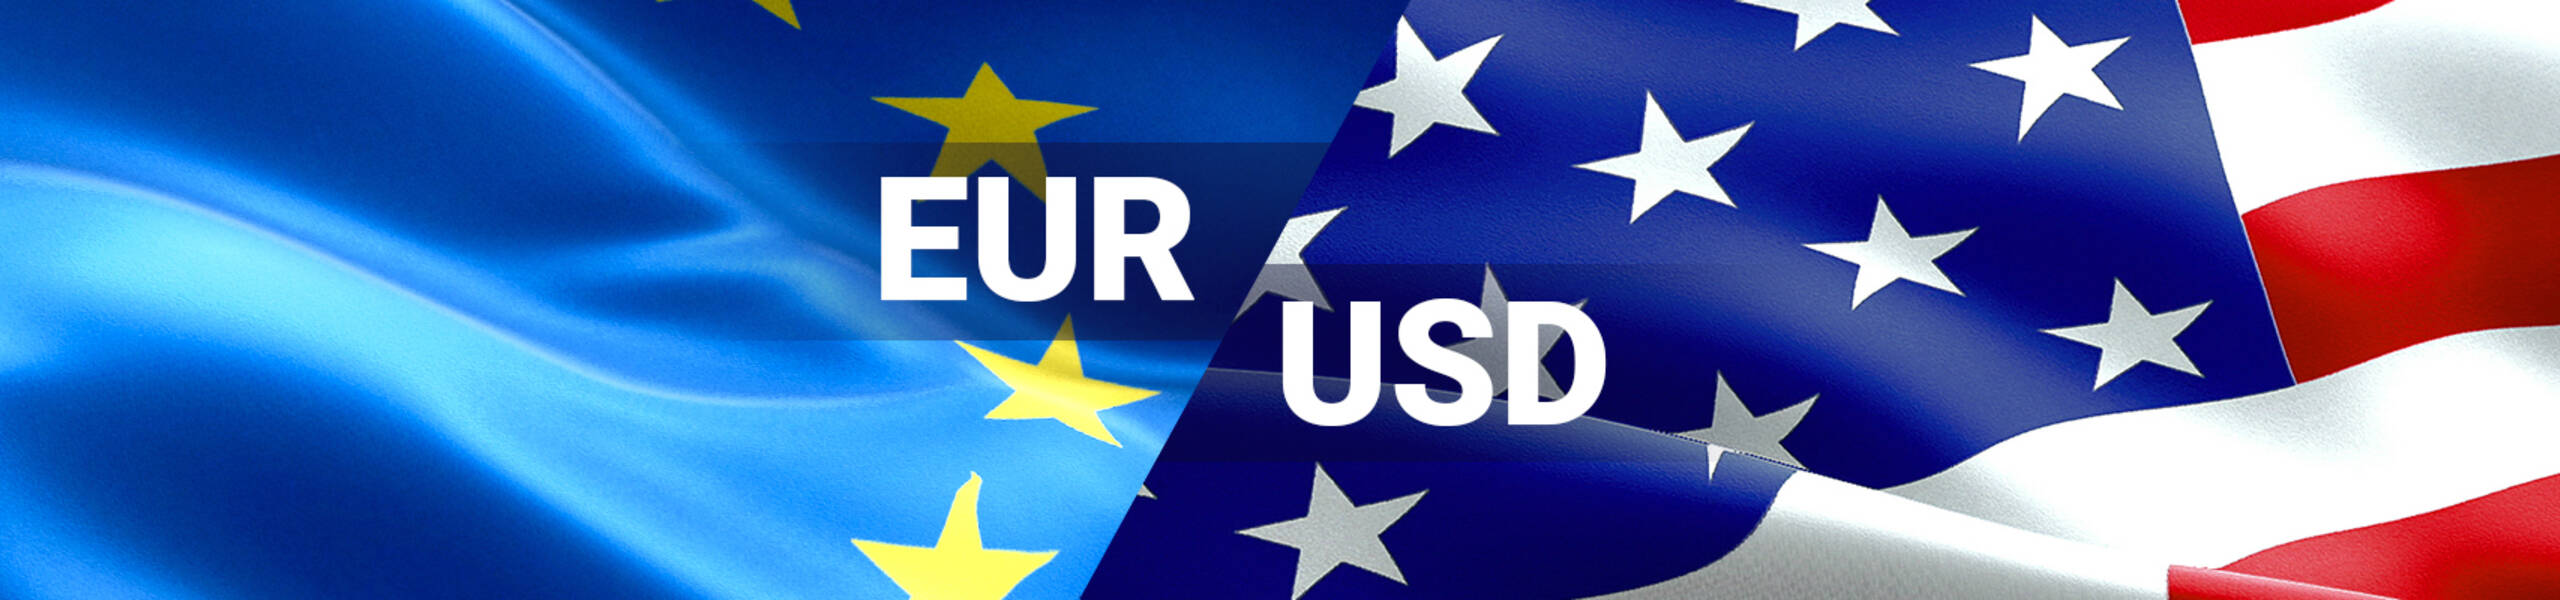 EUR/USD: euro in consolidation